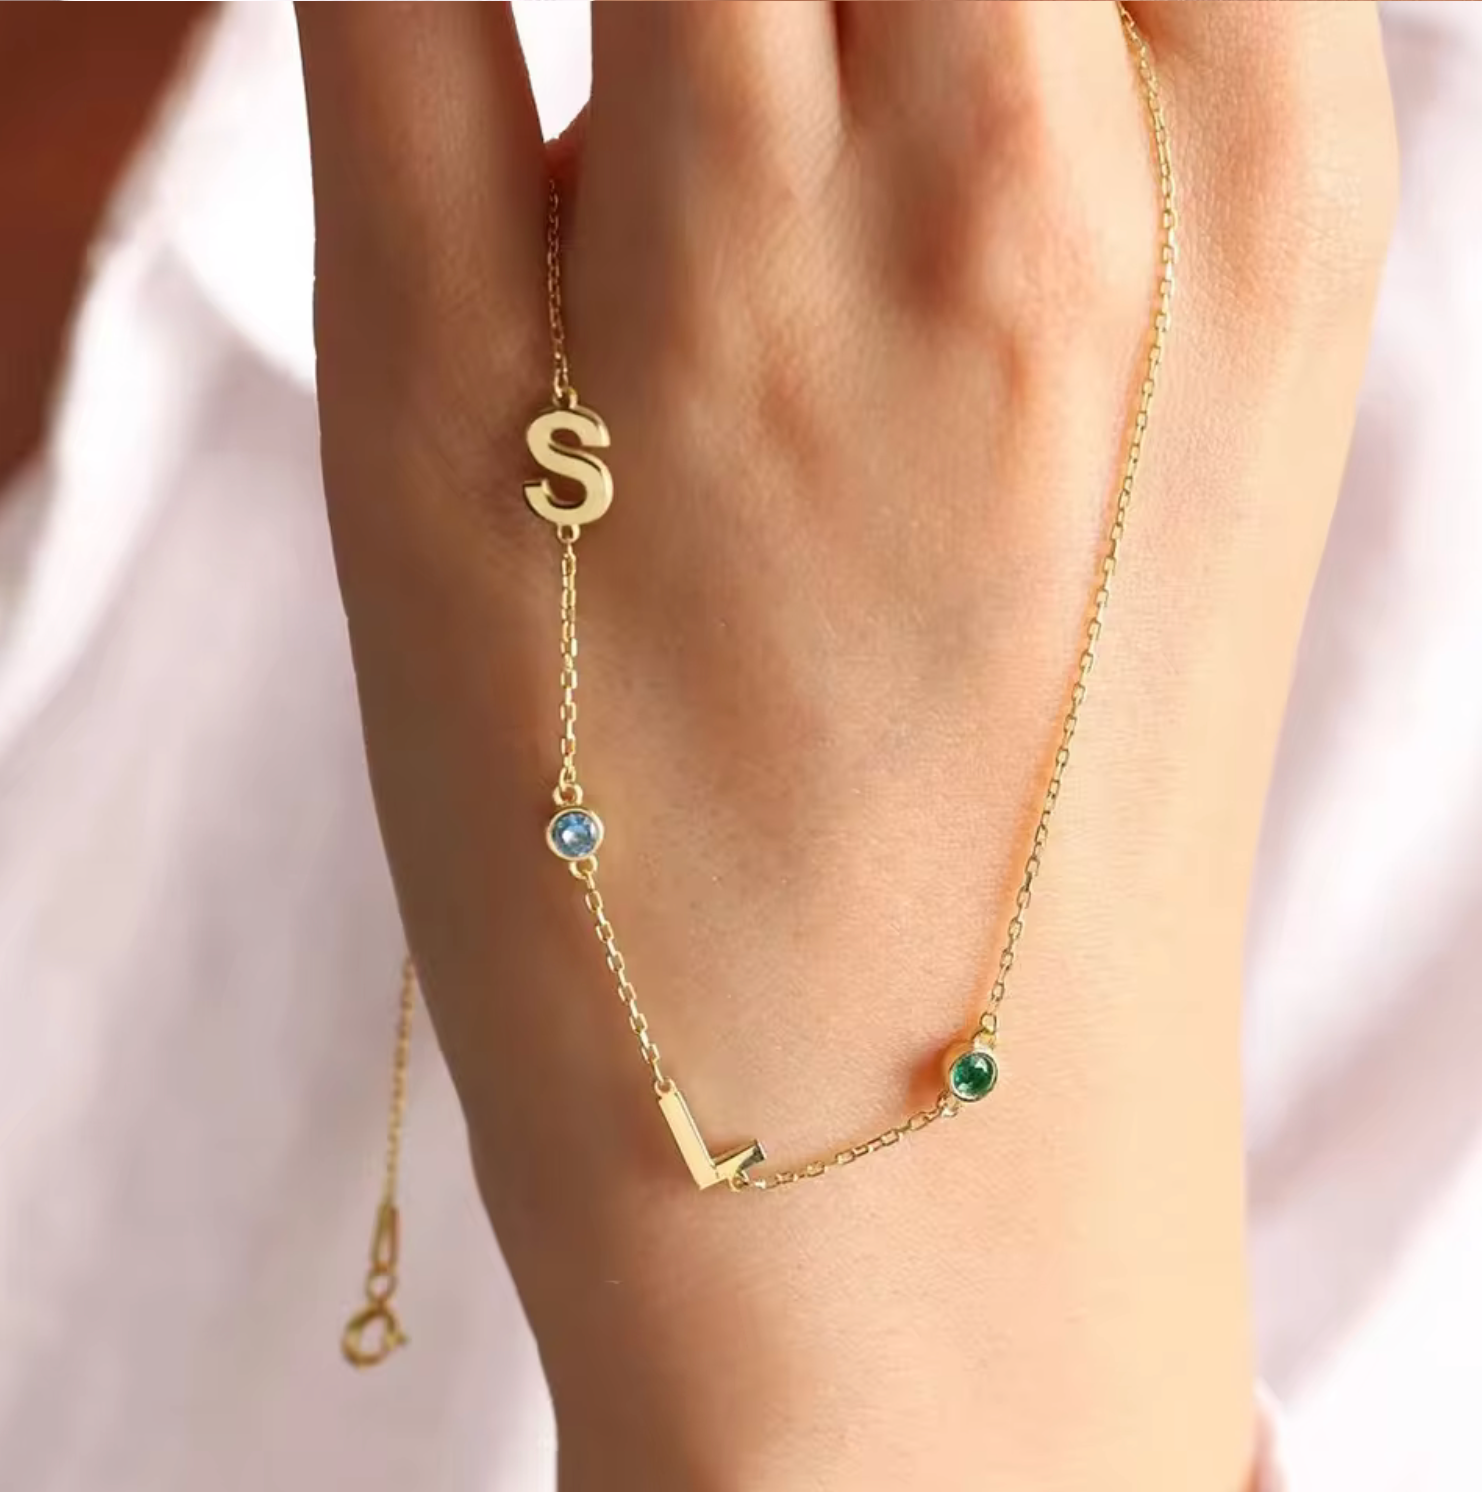 585 gold bracelet with personal engraving